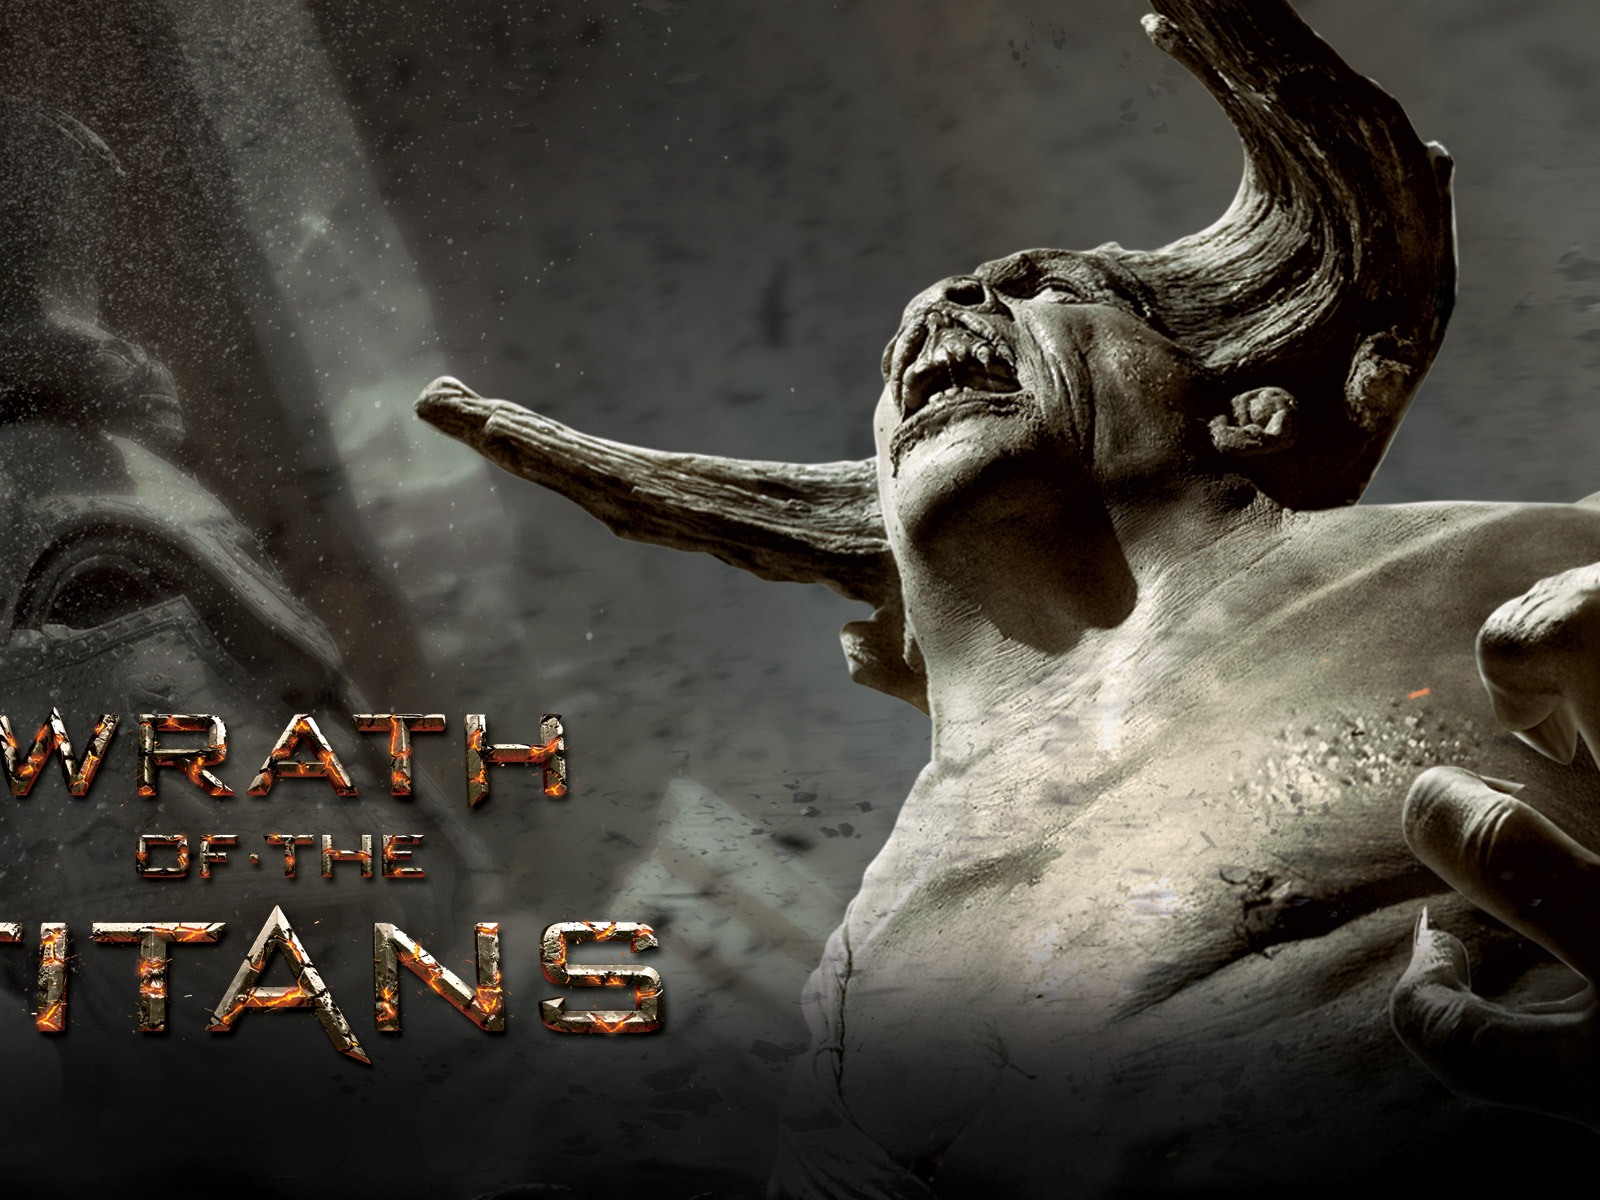 Wrath of the Titans HD Wallpapers #7 - 1600x1200